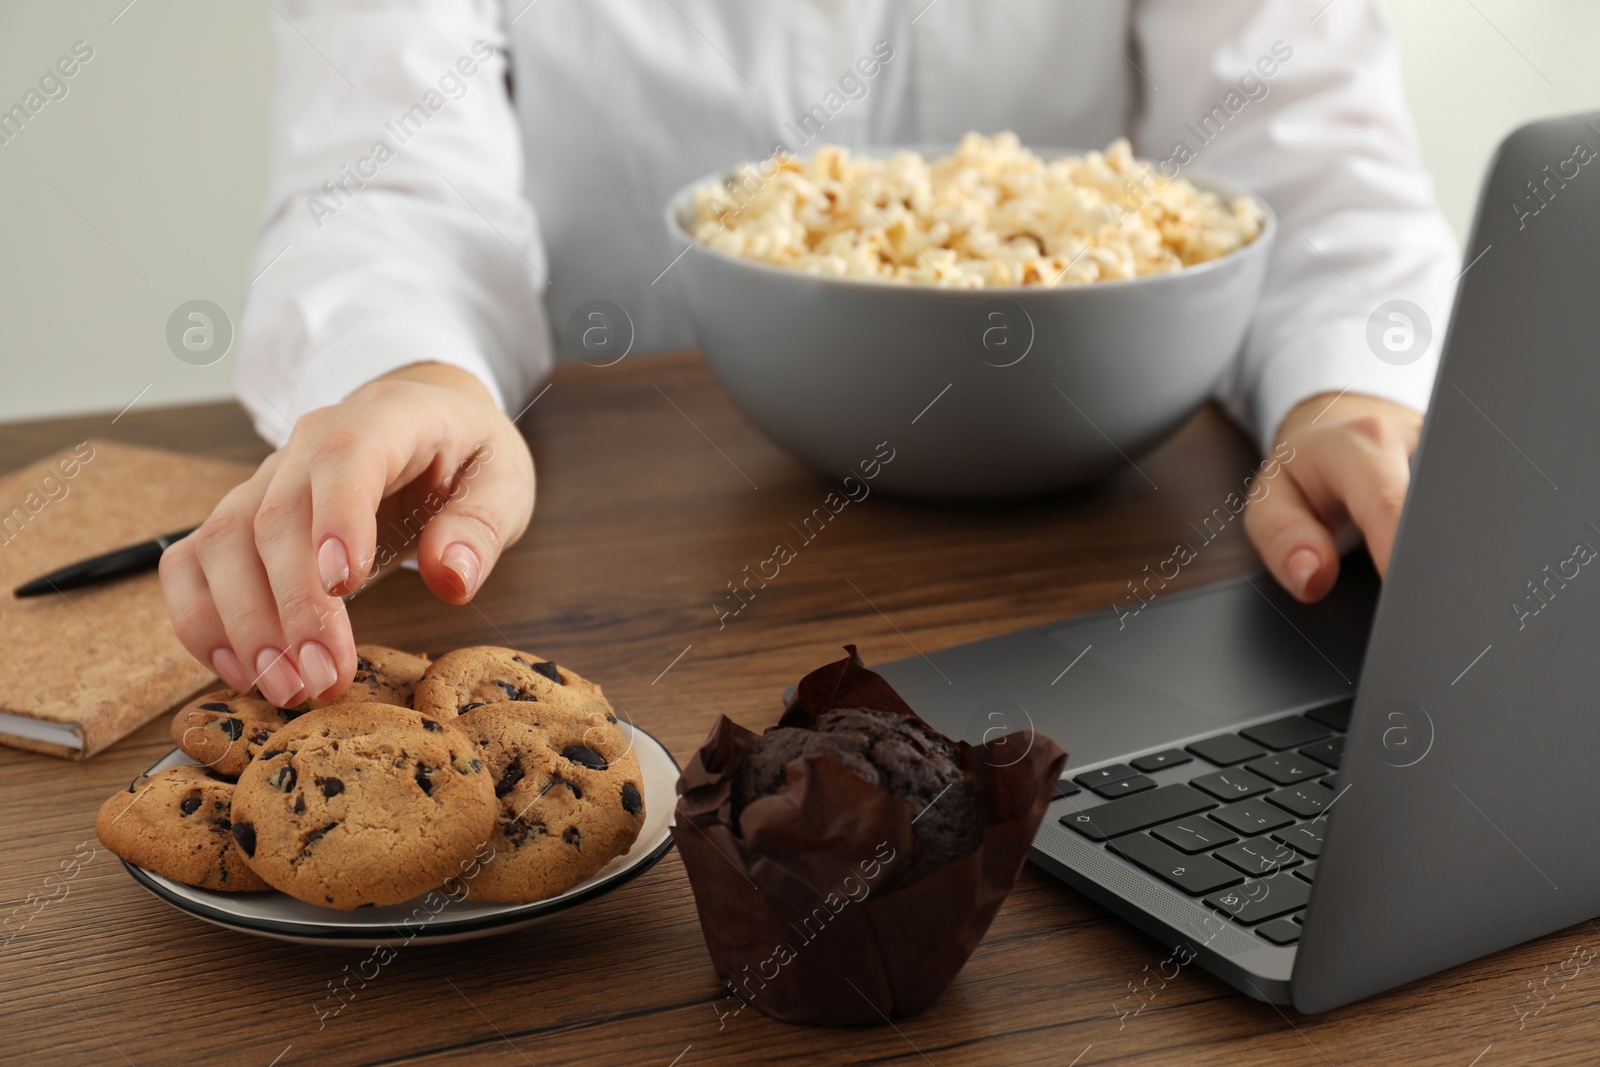 Photo of Bad habits. Woman eating cookies while using laptop at wooden table, closeup